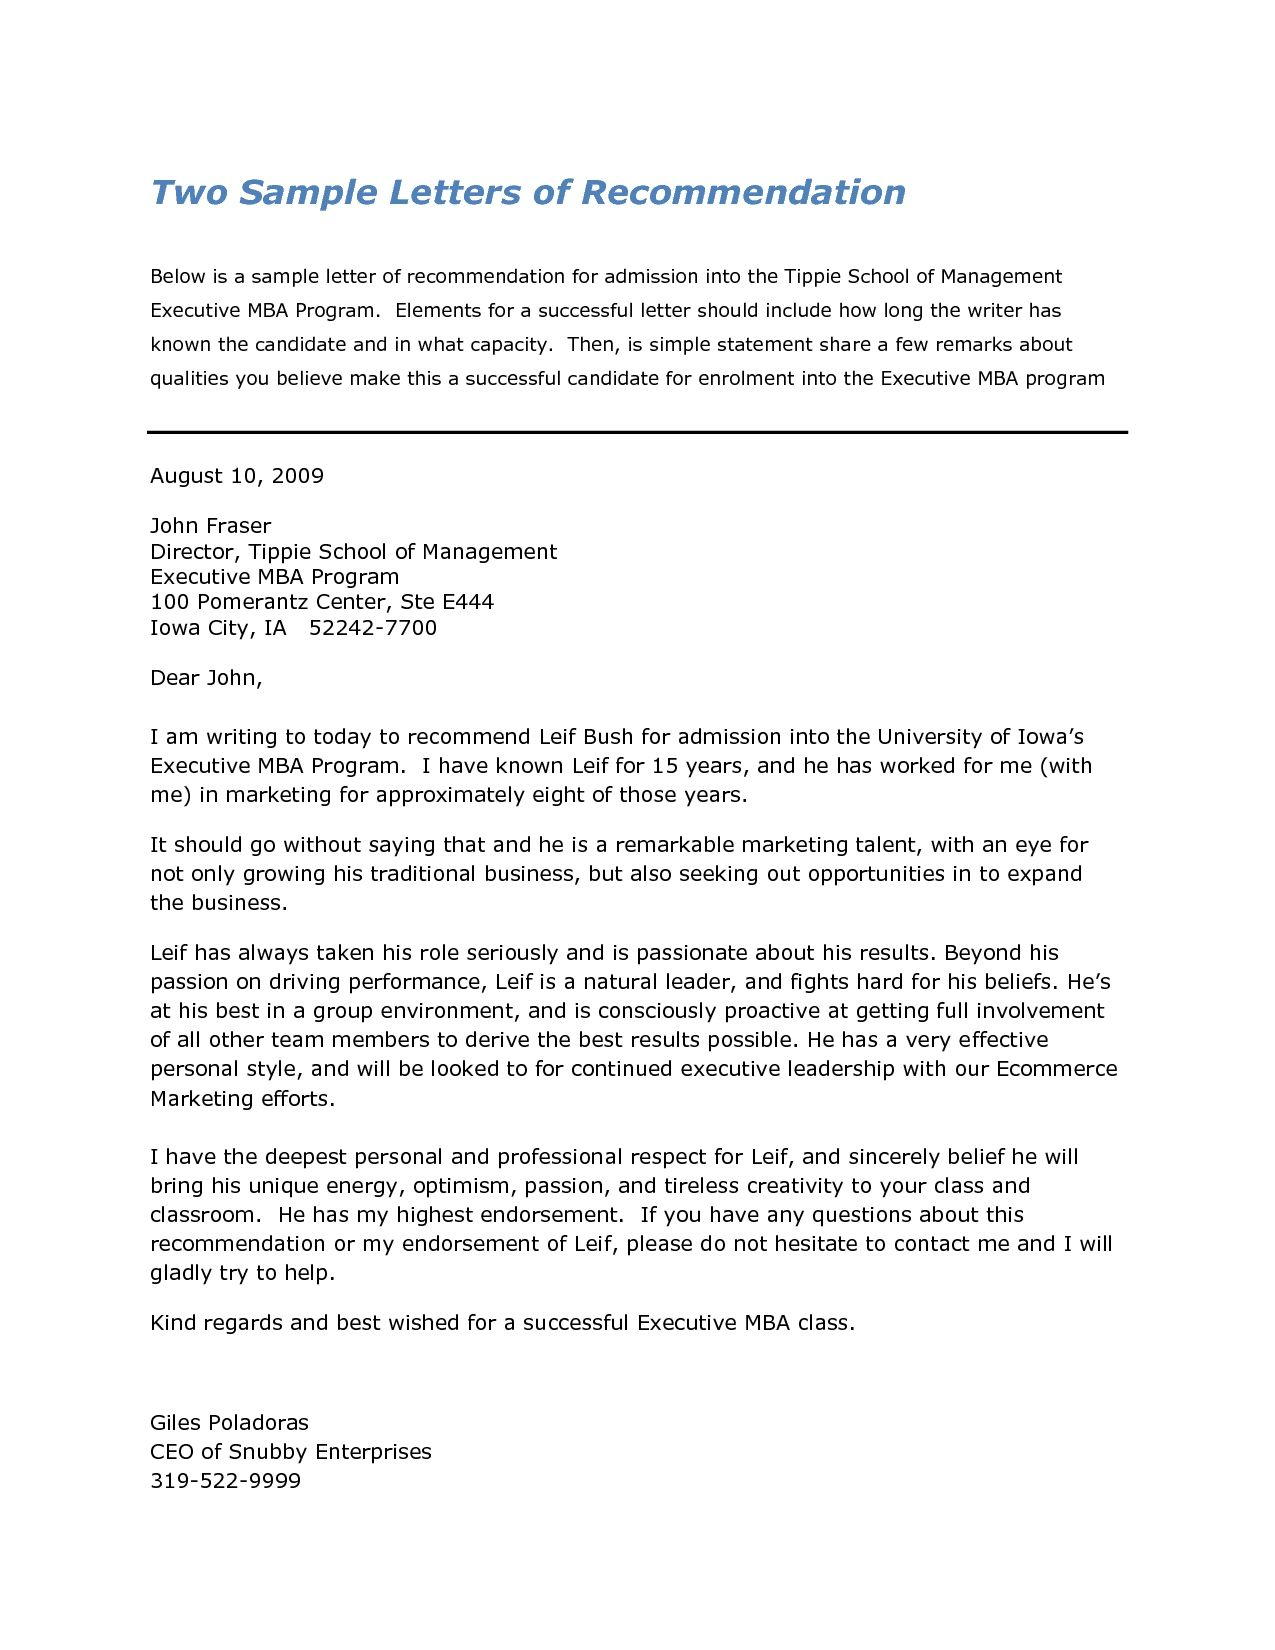 Recommendation Letter For Harvard Business School Pertaining inside dimensions 1275 X 1650